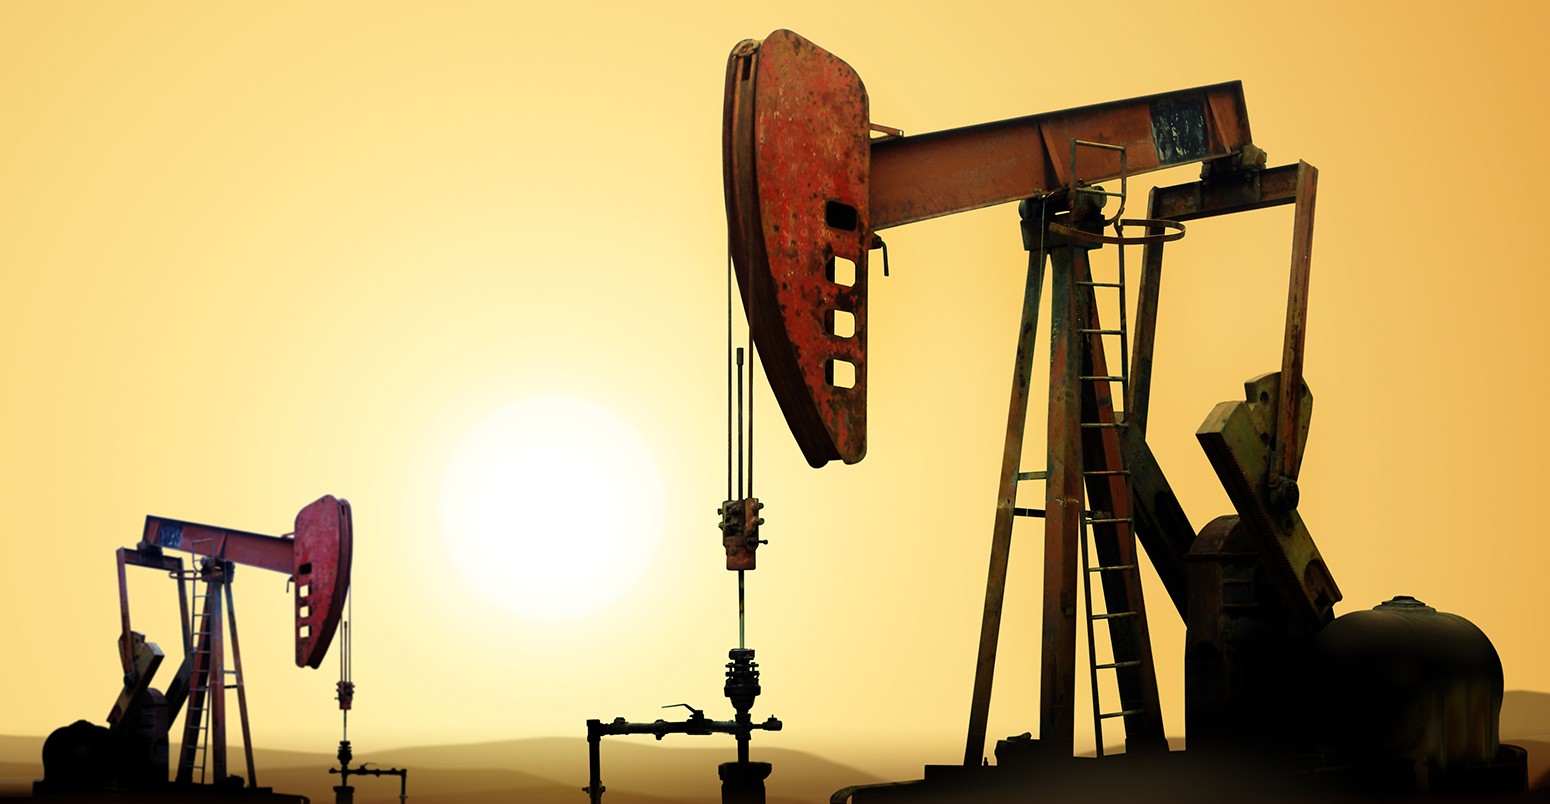 Oil pumps in deserted district